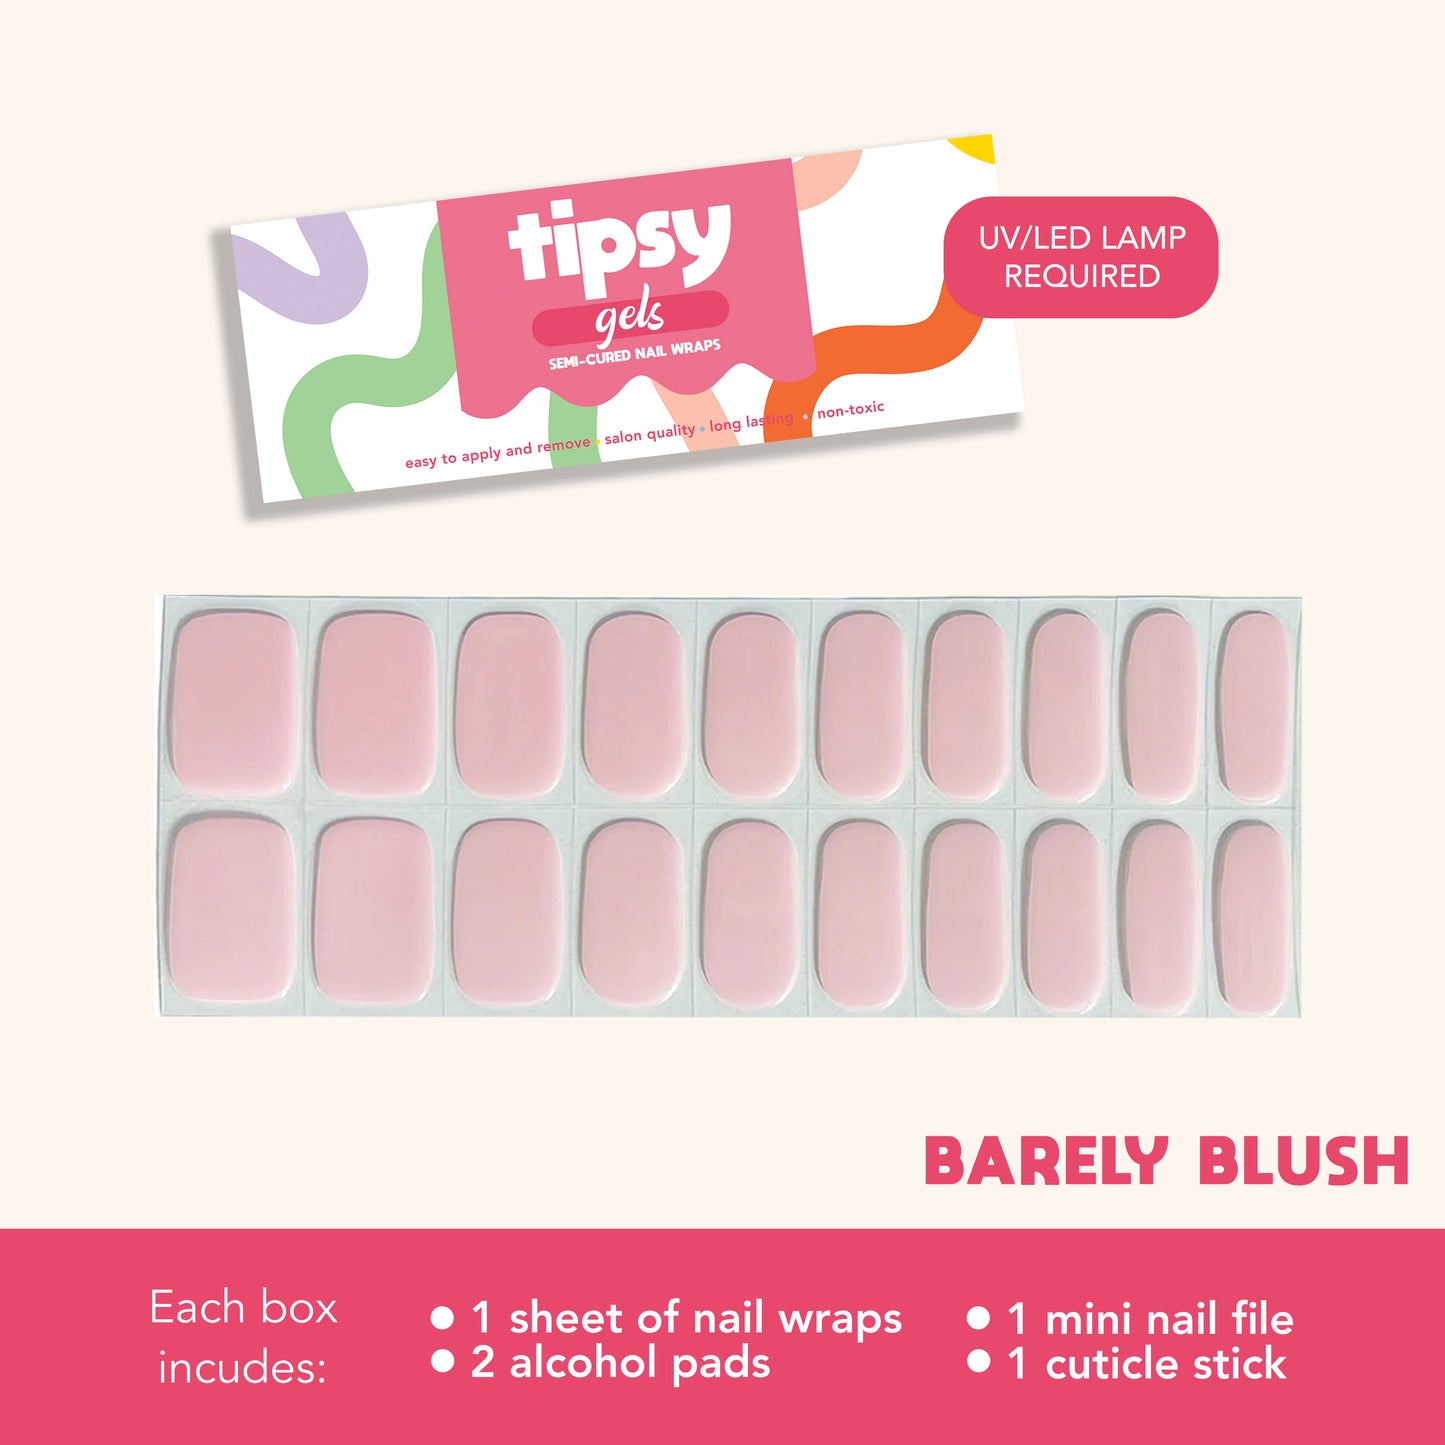 Barely Blush (Tipsy Gels Semi-Cured Nail Wraps)